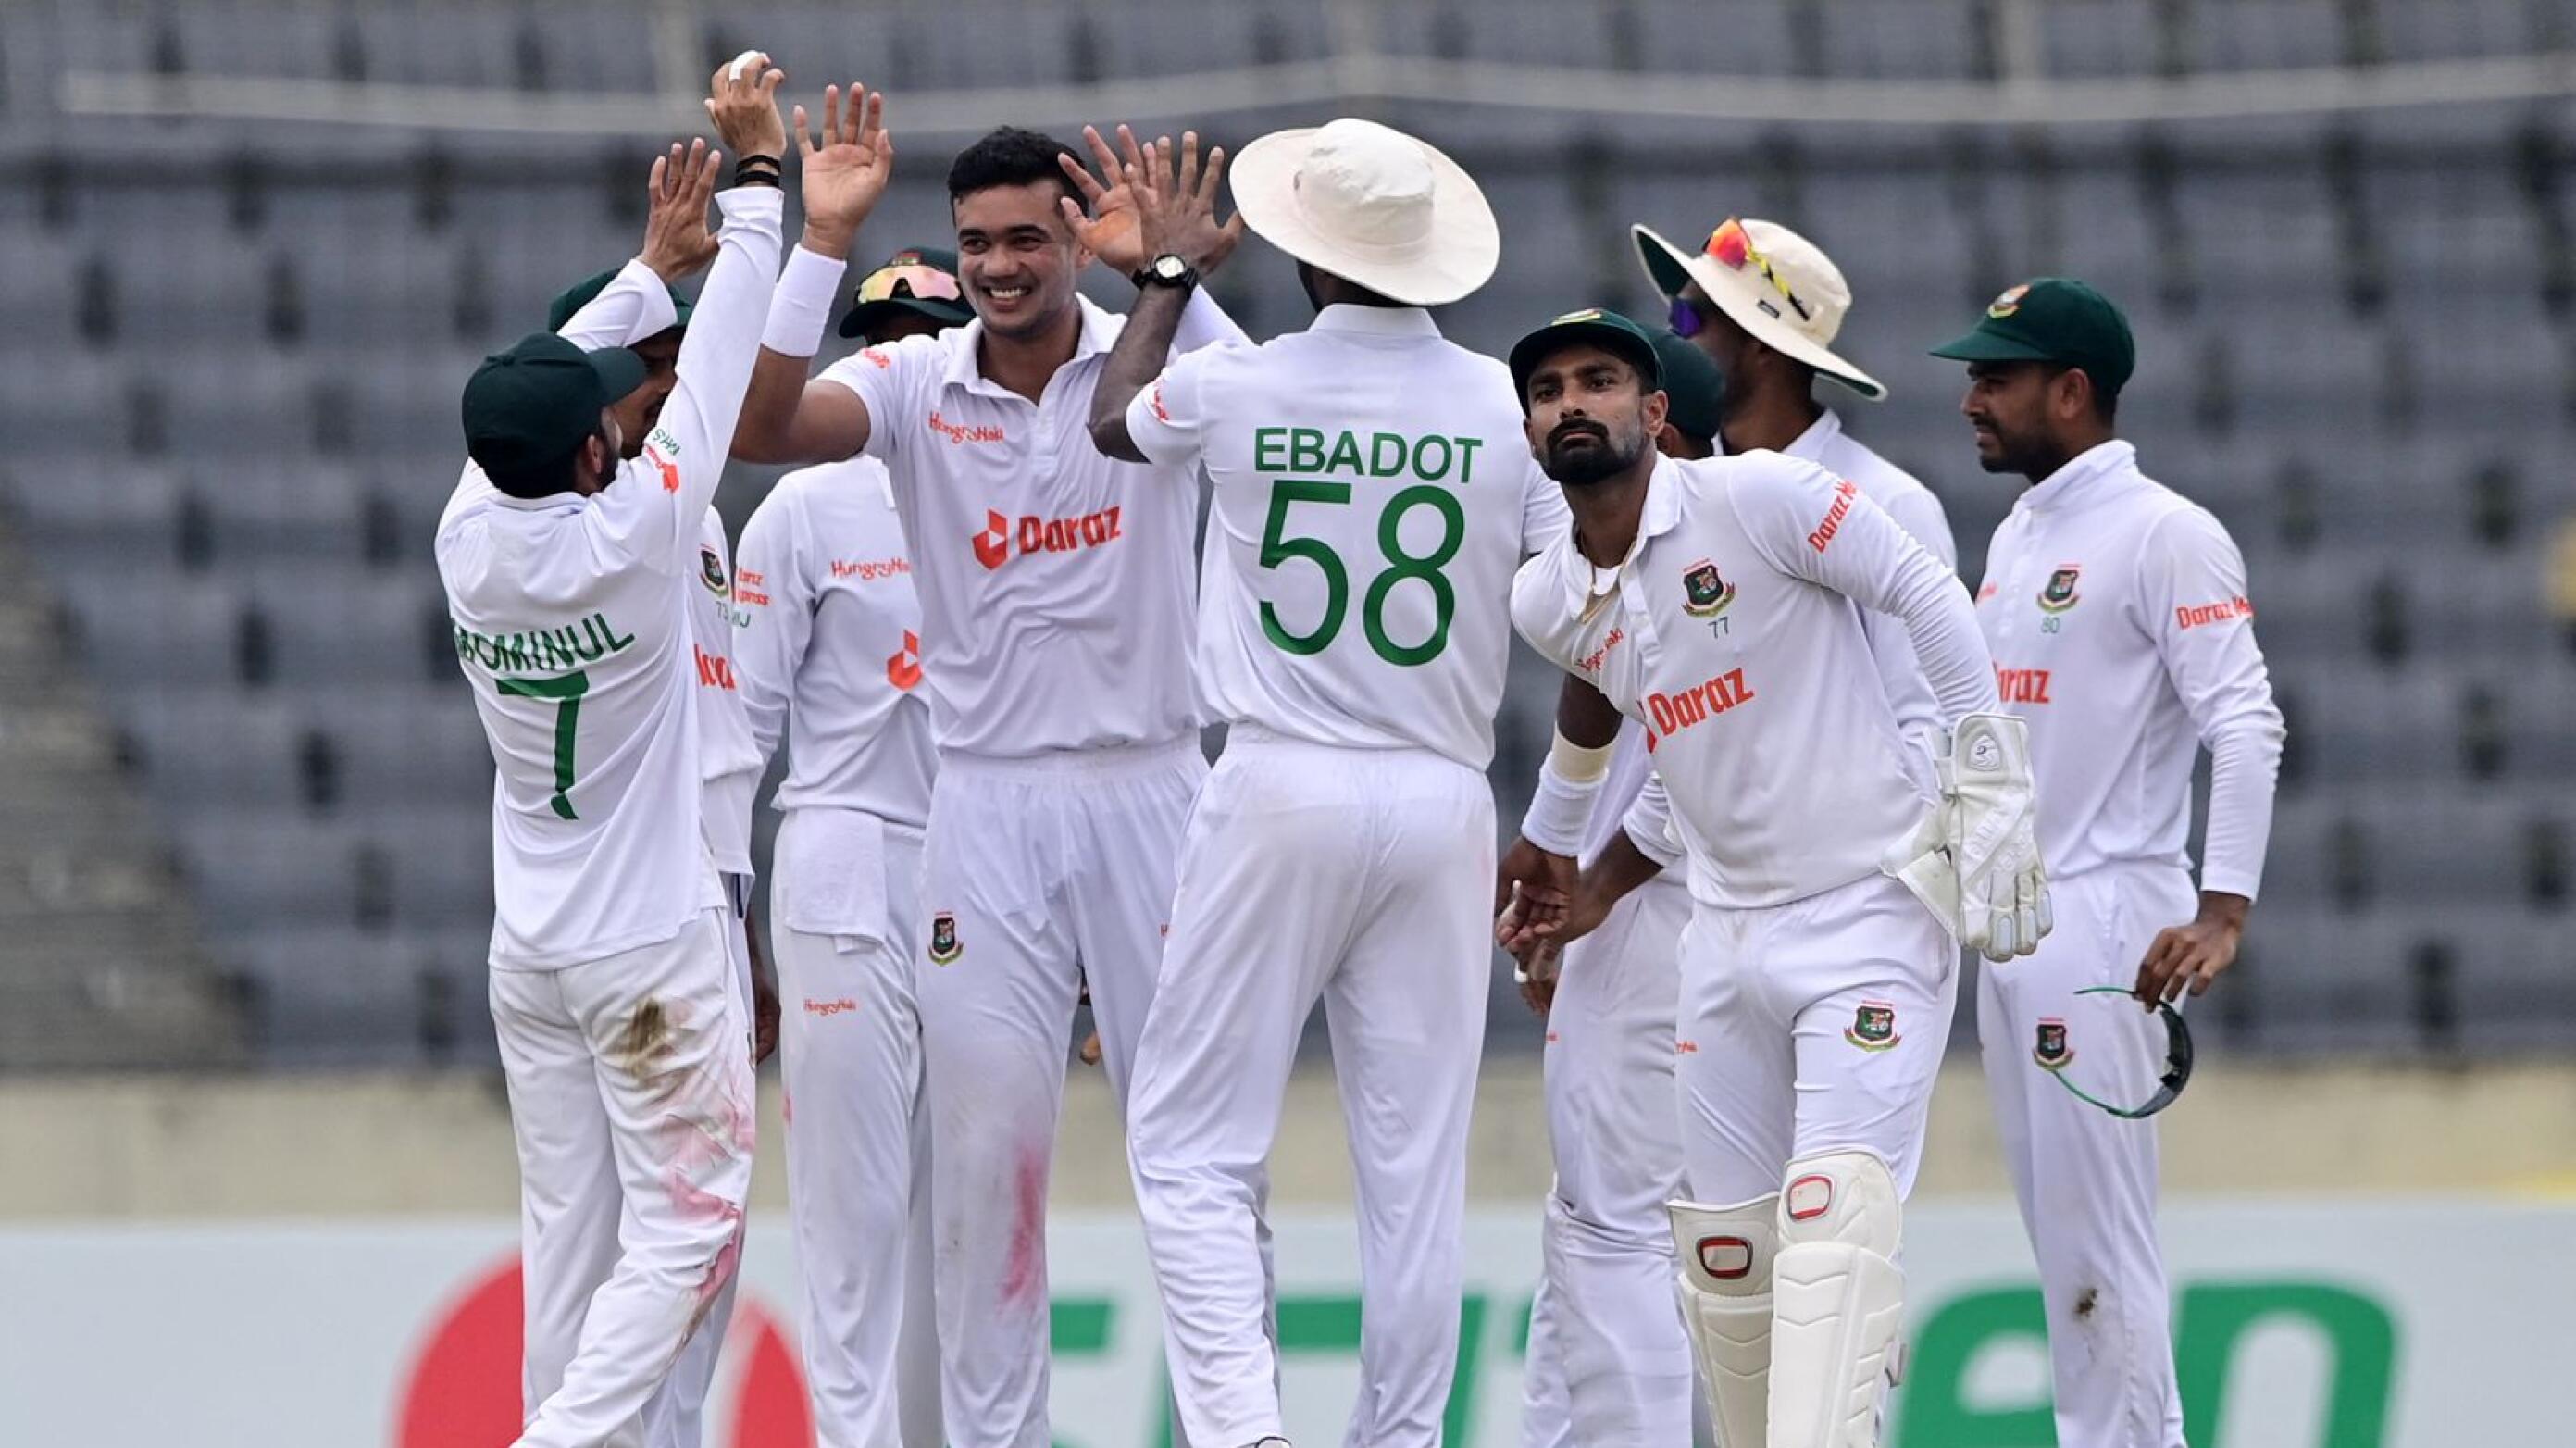 Bangladesh's Taskin Ahmed celebrates with teammates after the dismissal of Afghanistan's Rahmat Shah during the fourth day of their Test match at the Sher-e-Bangla National Cricket Stadium in Dhaka on Saturday